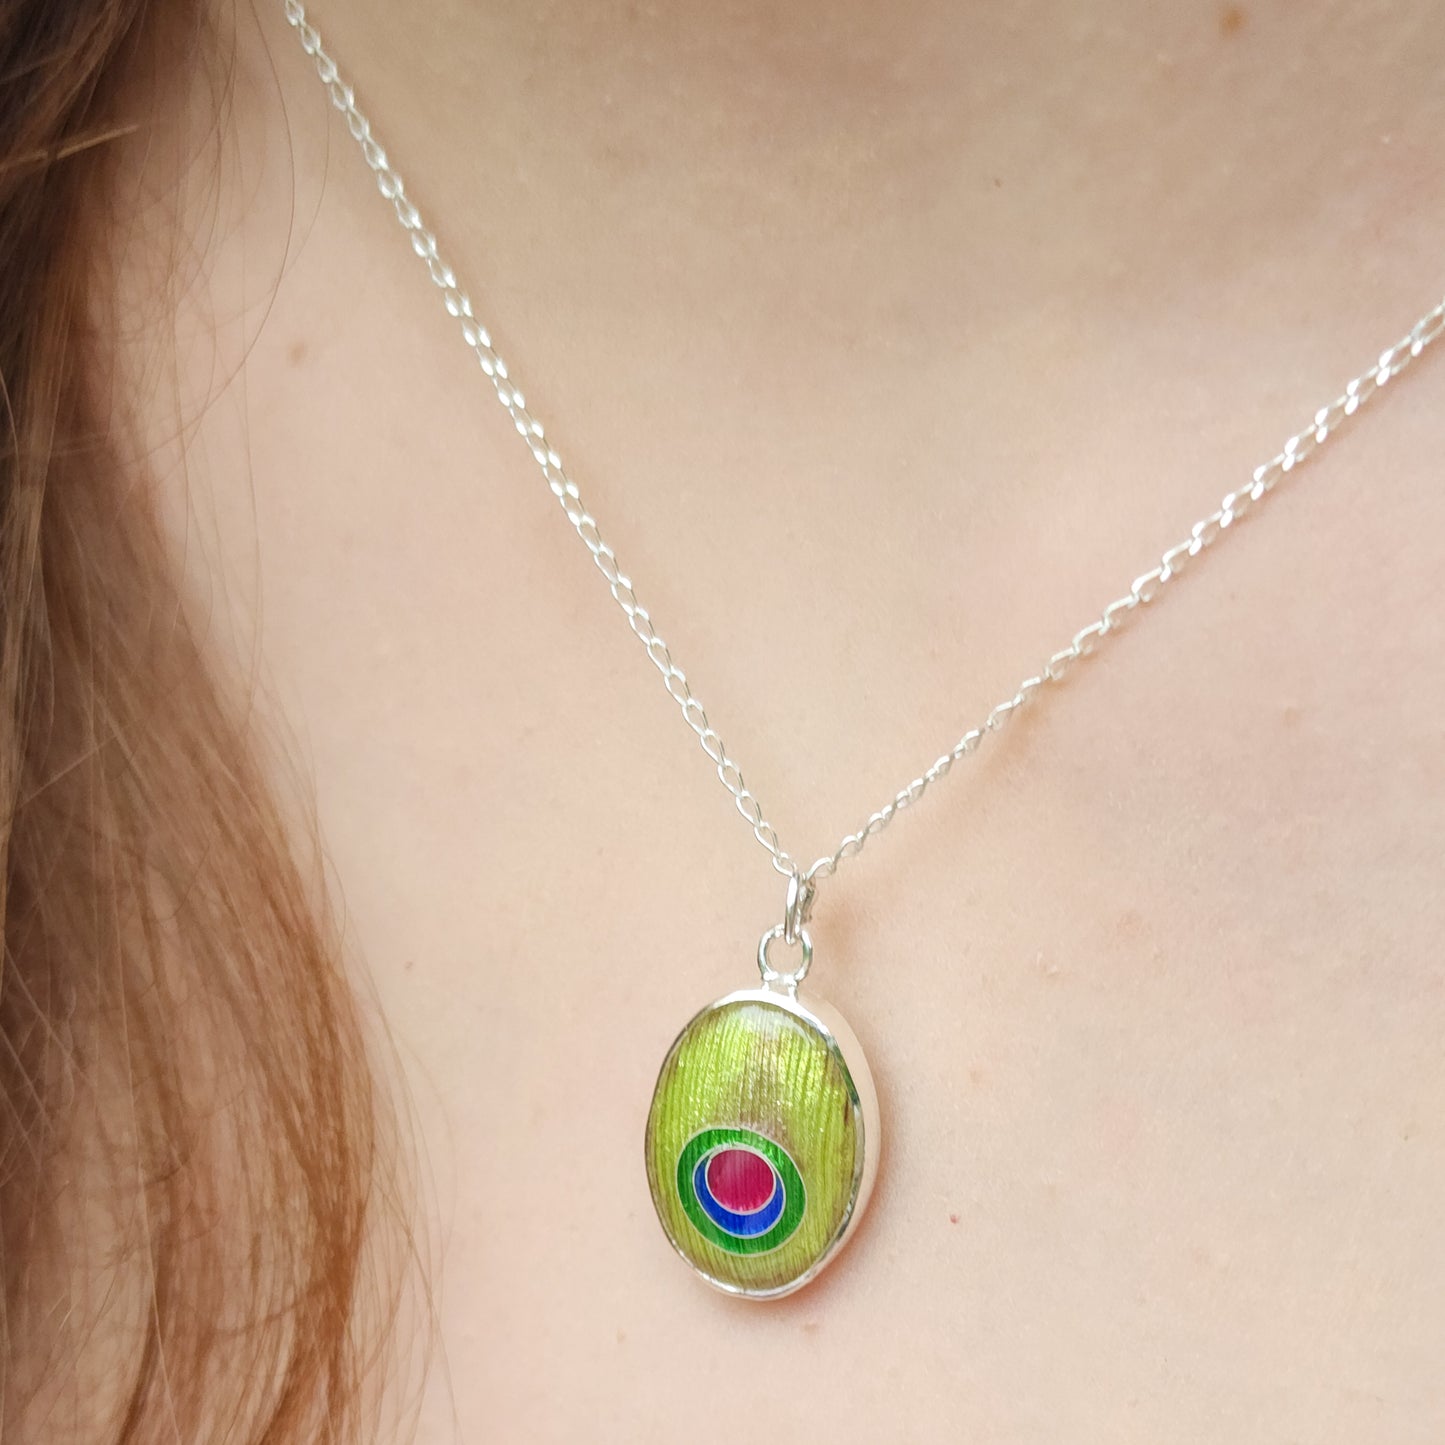 Peacock Pendant - Cloisonne and Champleve Enamels on a Fine Silver (999), Handmade in Australia